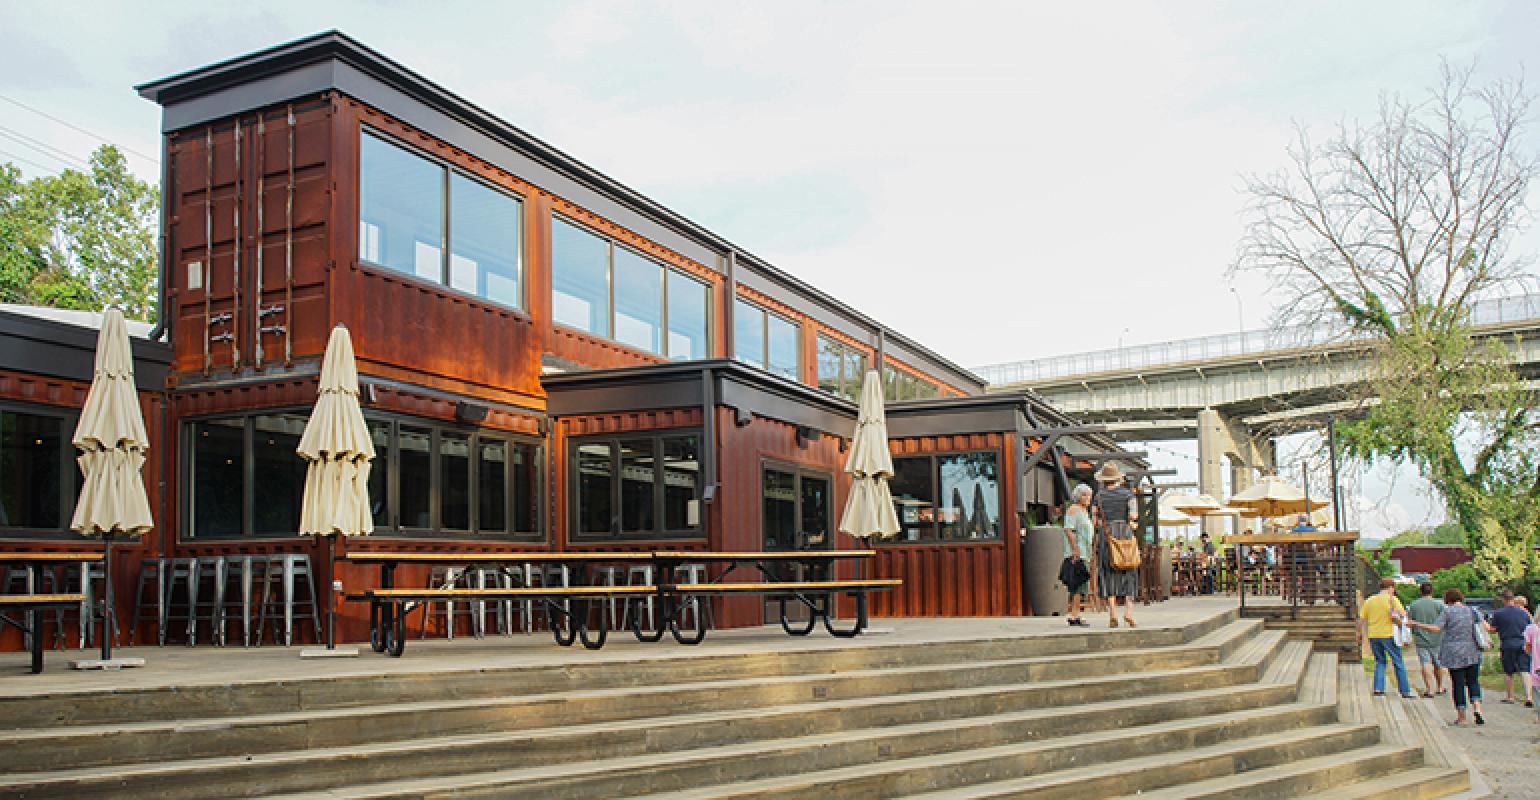 Restaurants pop up inside recycled shipping containers